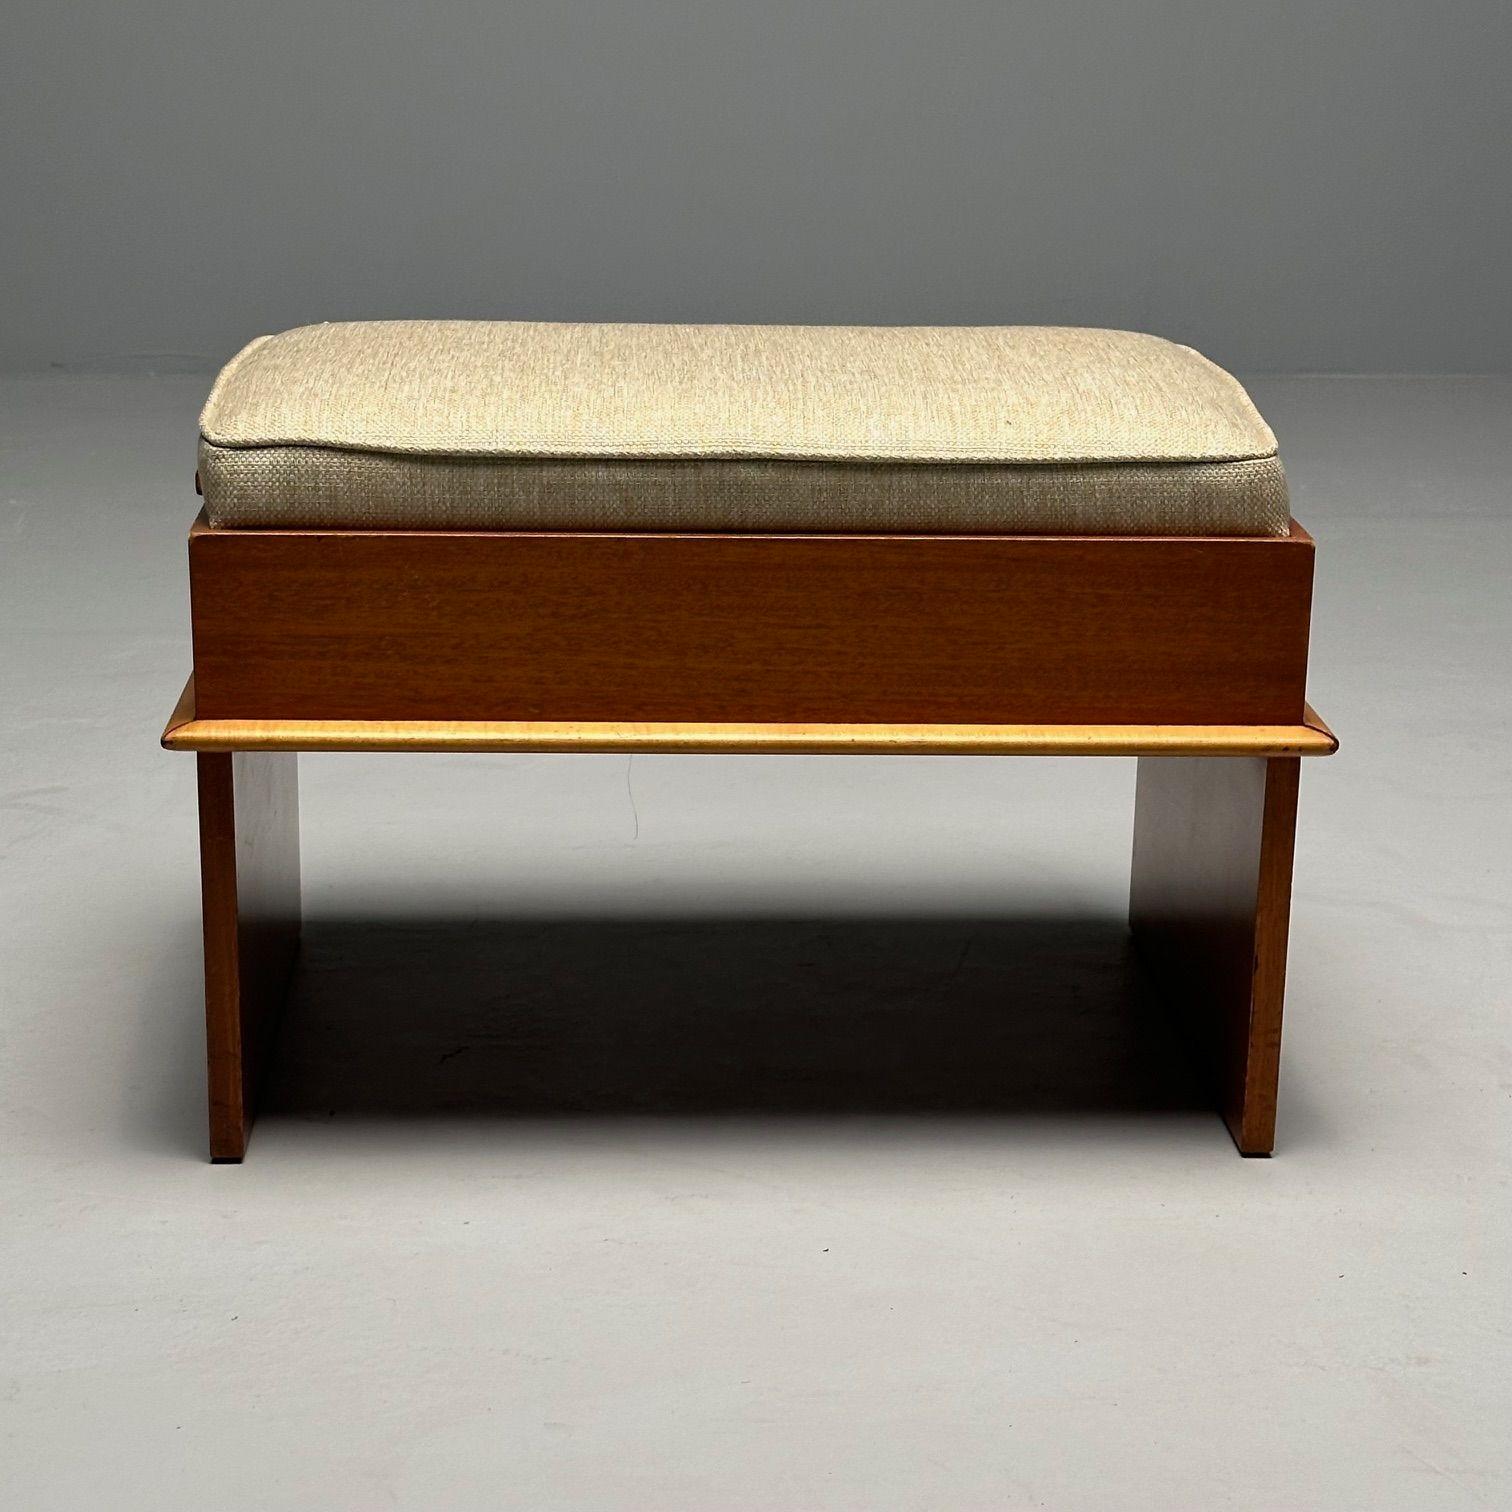 Mid-20th Century Paul Frankl, Johnson Furniture, Station Wagon Bench, Rock Maple, Fabric, 1950s For Sale